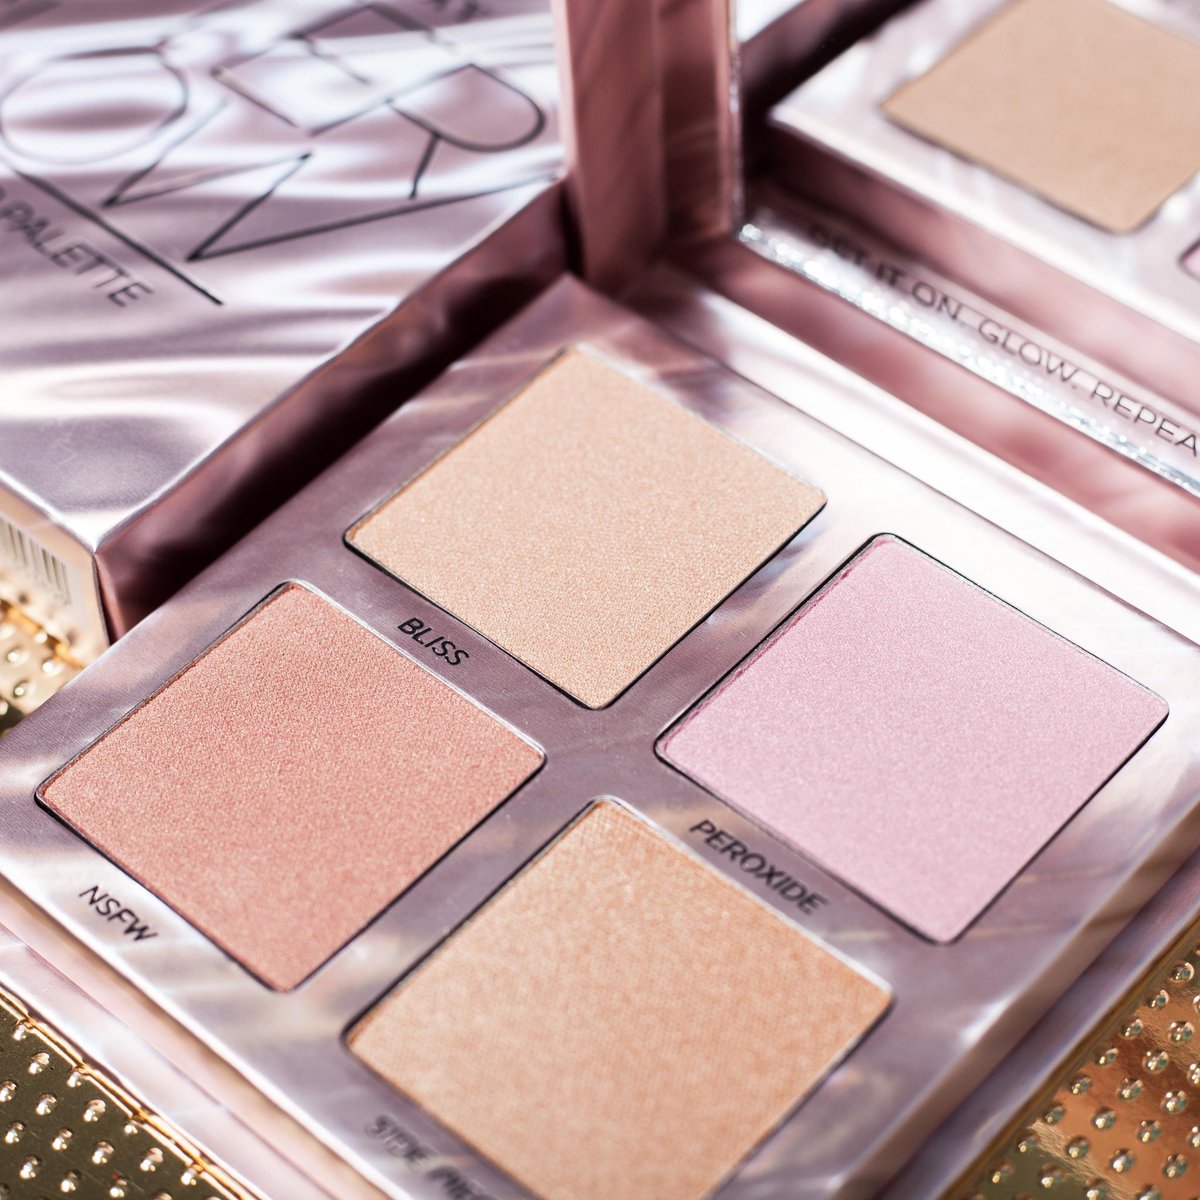 Almindelig by ballet Urban Decay on Twitter: "It's glow time. ✨ Afterglow Highlighter Palette.  https://t.co/A7snfDEcsj #UrbanDecay https://t.co/5hhwB4W2S5" / Twitter